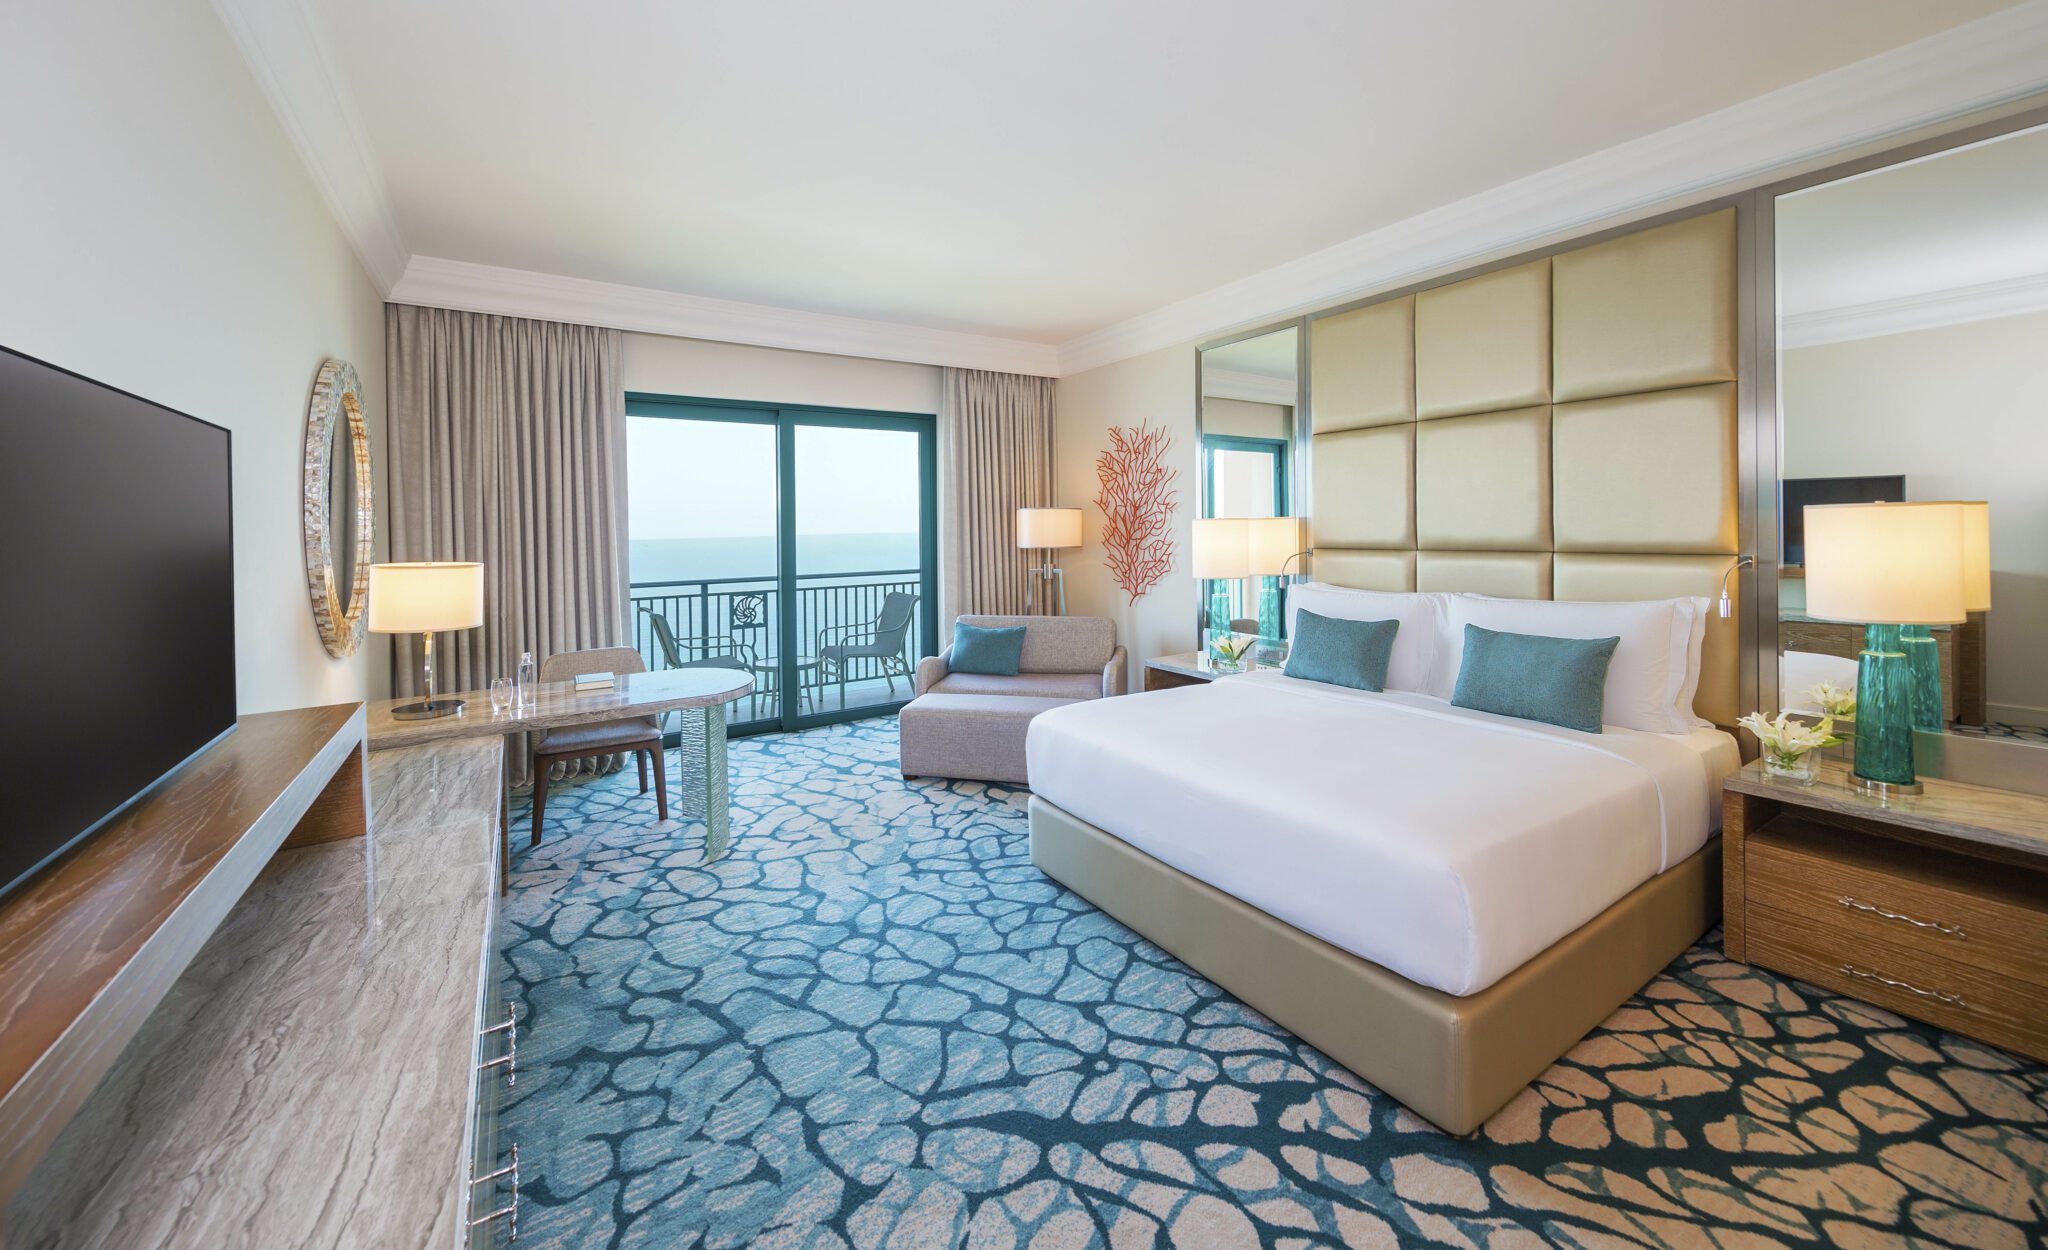 Image of a deluxe bedroom at Atllantis the Palm with double bed and balcony